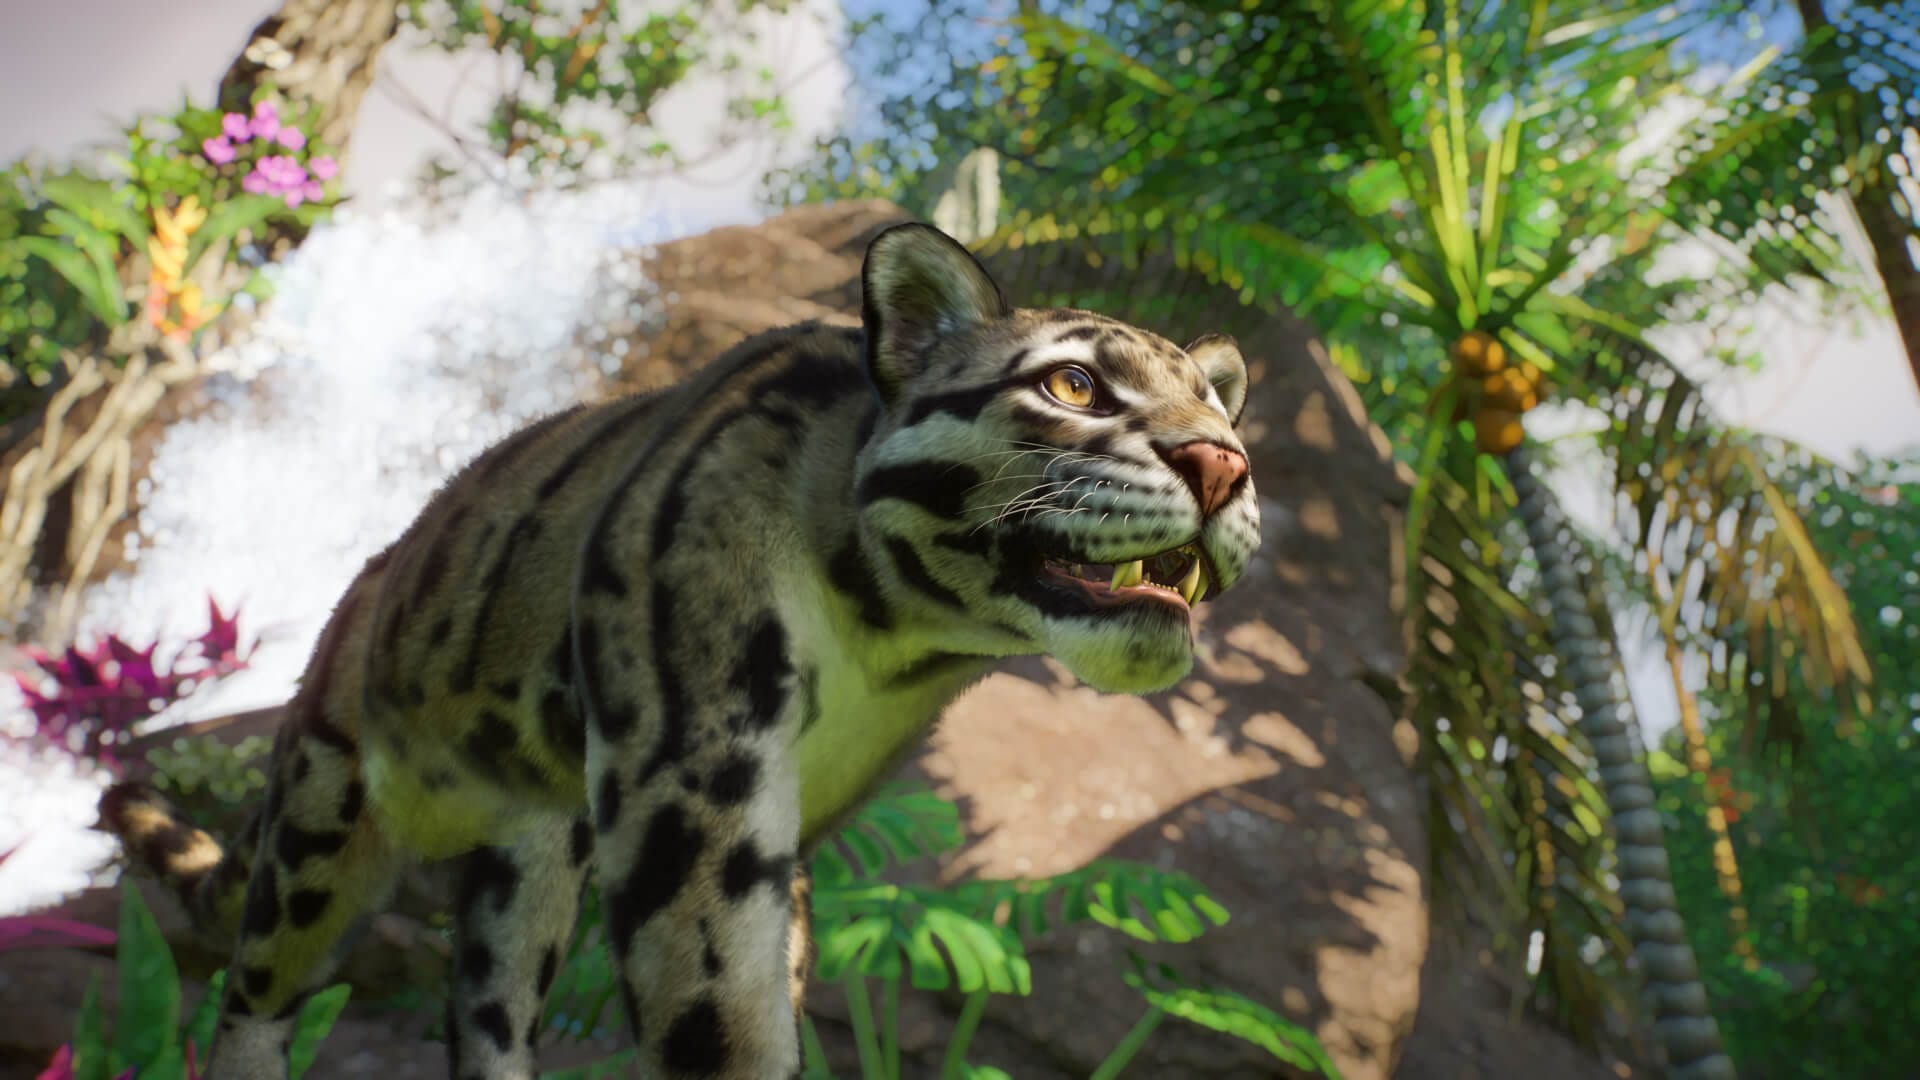 The Clouded Leopard, which is available along with 7 other animals in the new Planet Zoo DLC pack